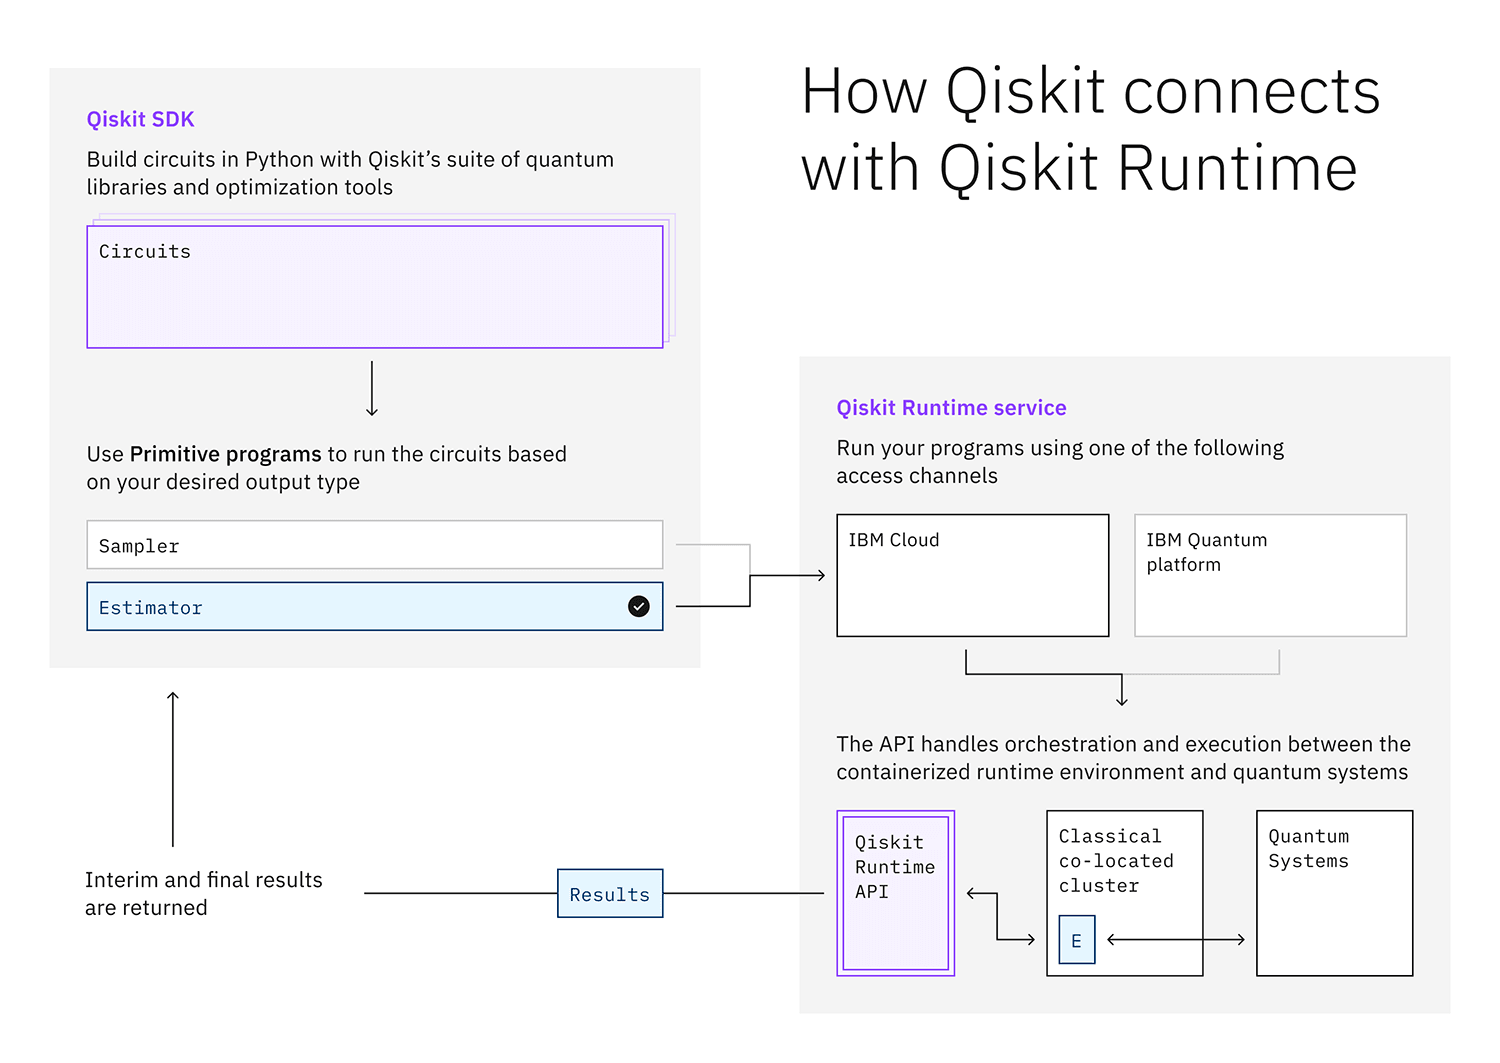 Workflow: How Qiskit connects to Qiskit Runtime